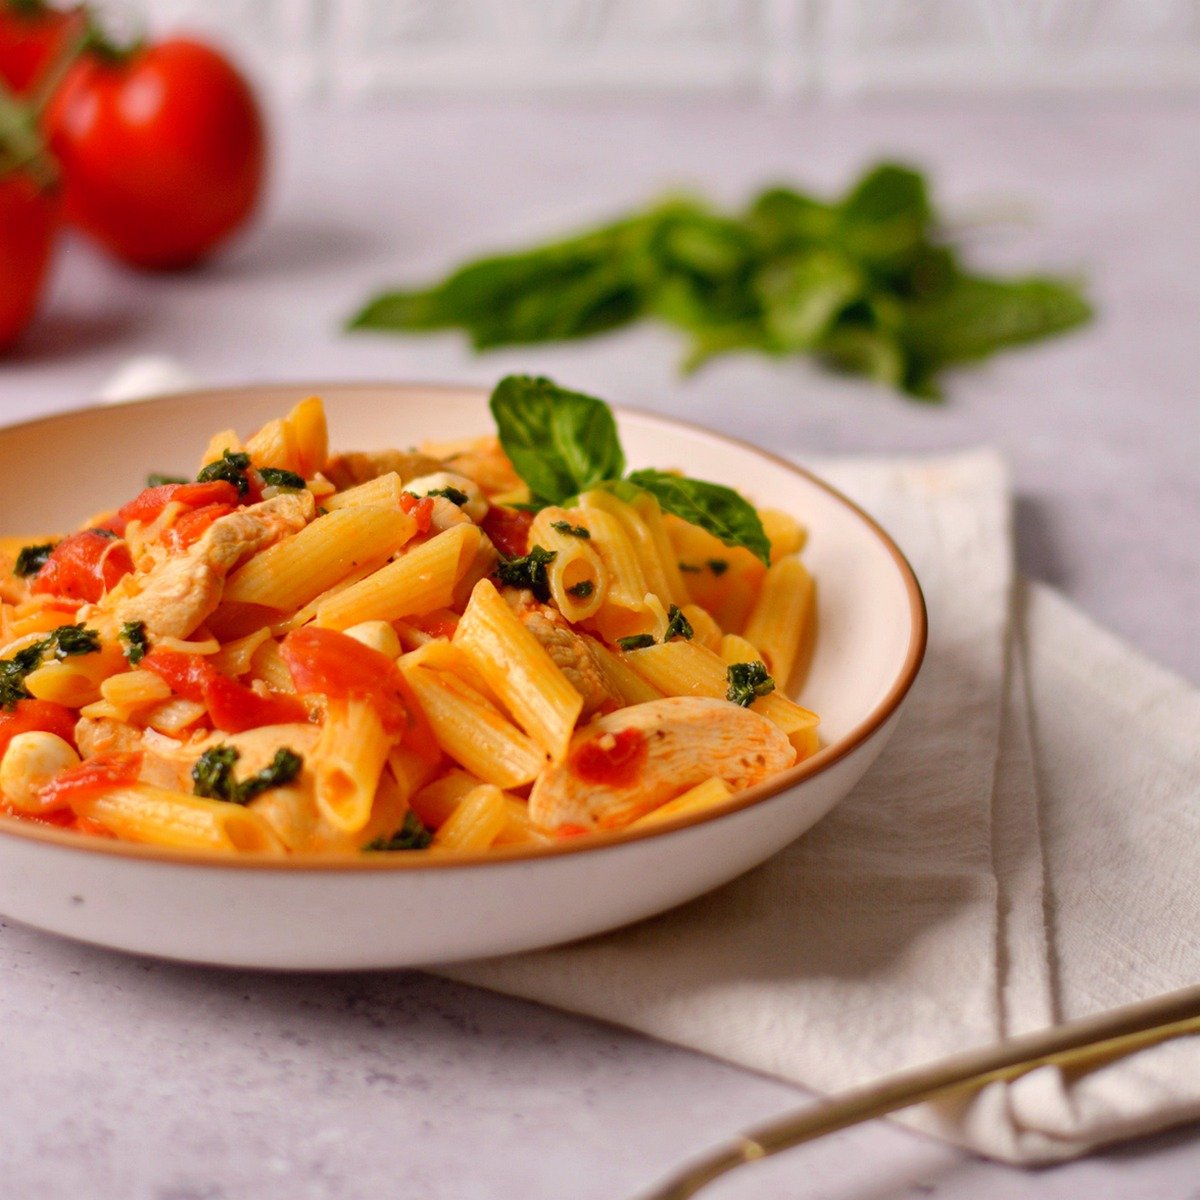 A shallow bowl filled with tomato basil pasta.